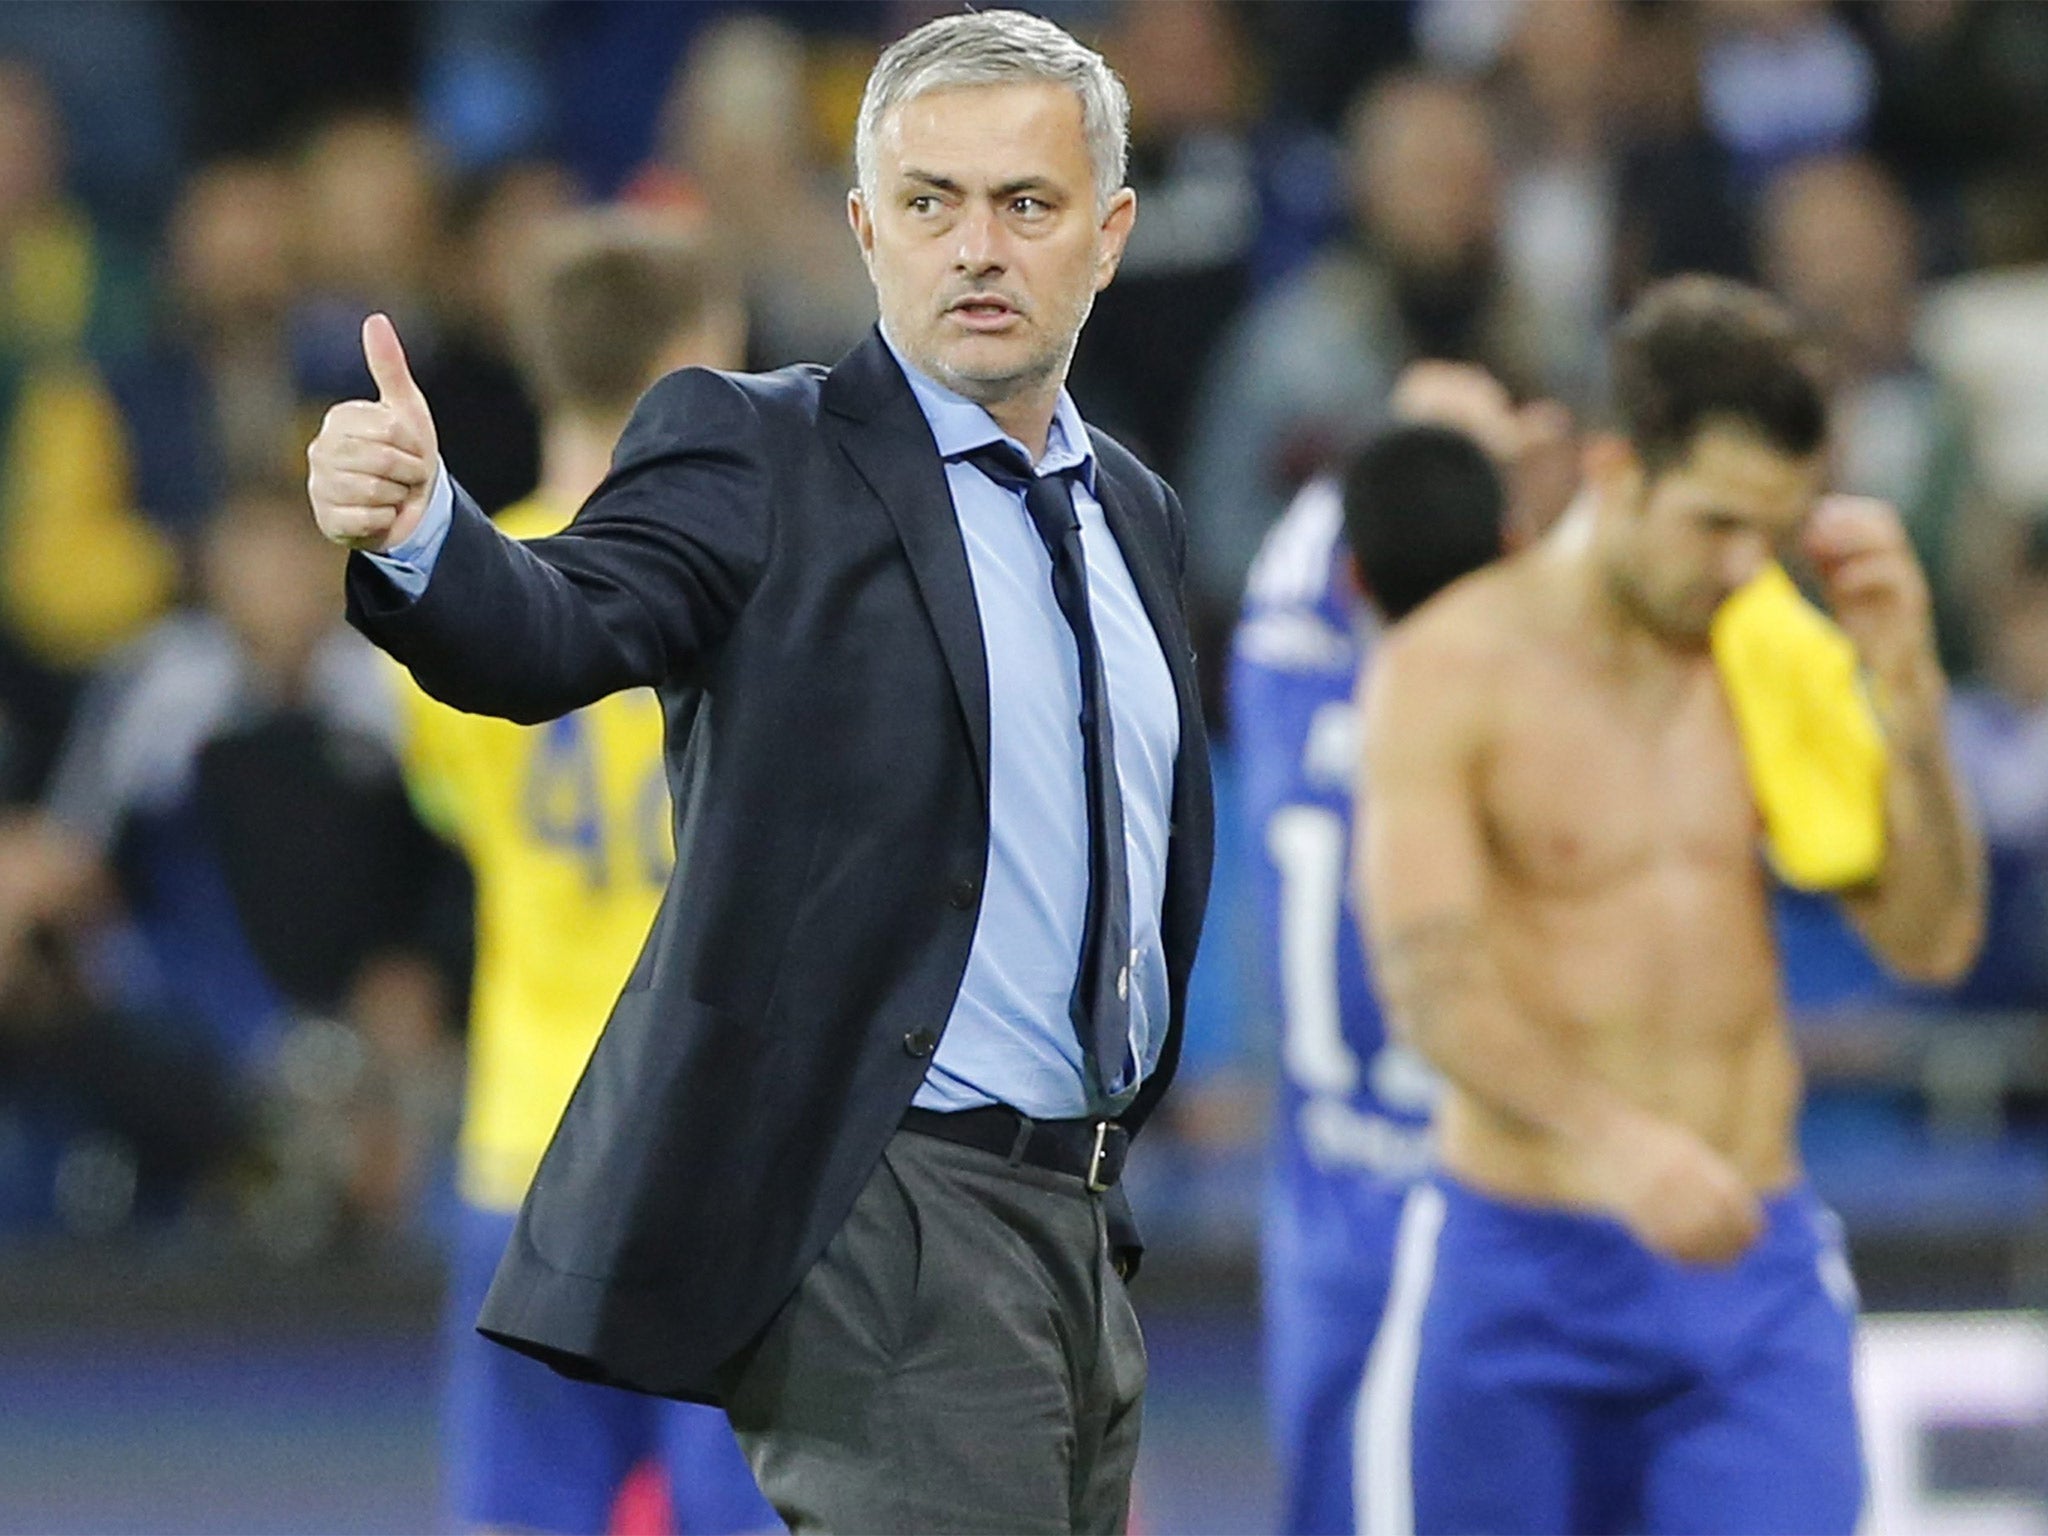 Jose Mourinho said there was 'no problem' between him and striker Diego Costa - but the Chelsea manager wasn't pleased with the pitch at the Sammy Ofer Stadium